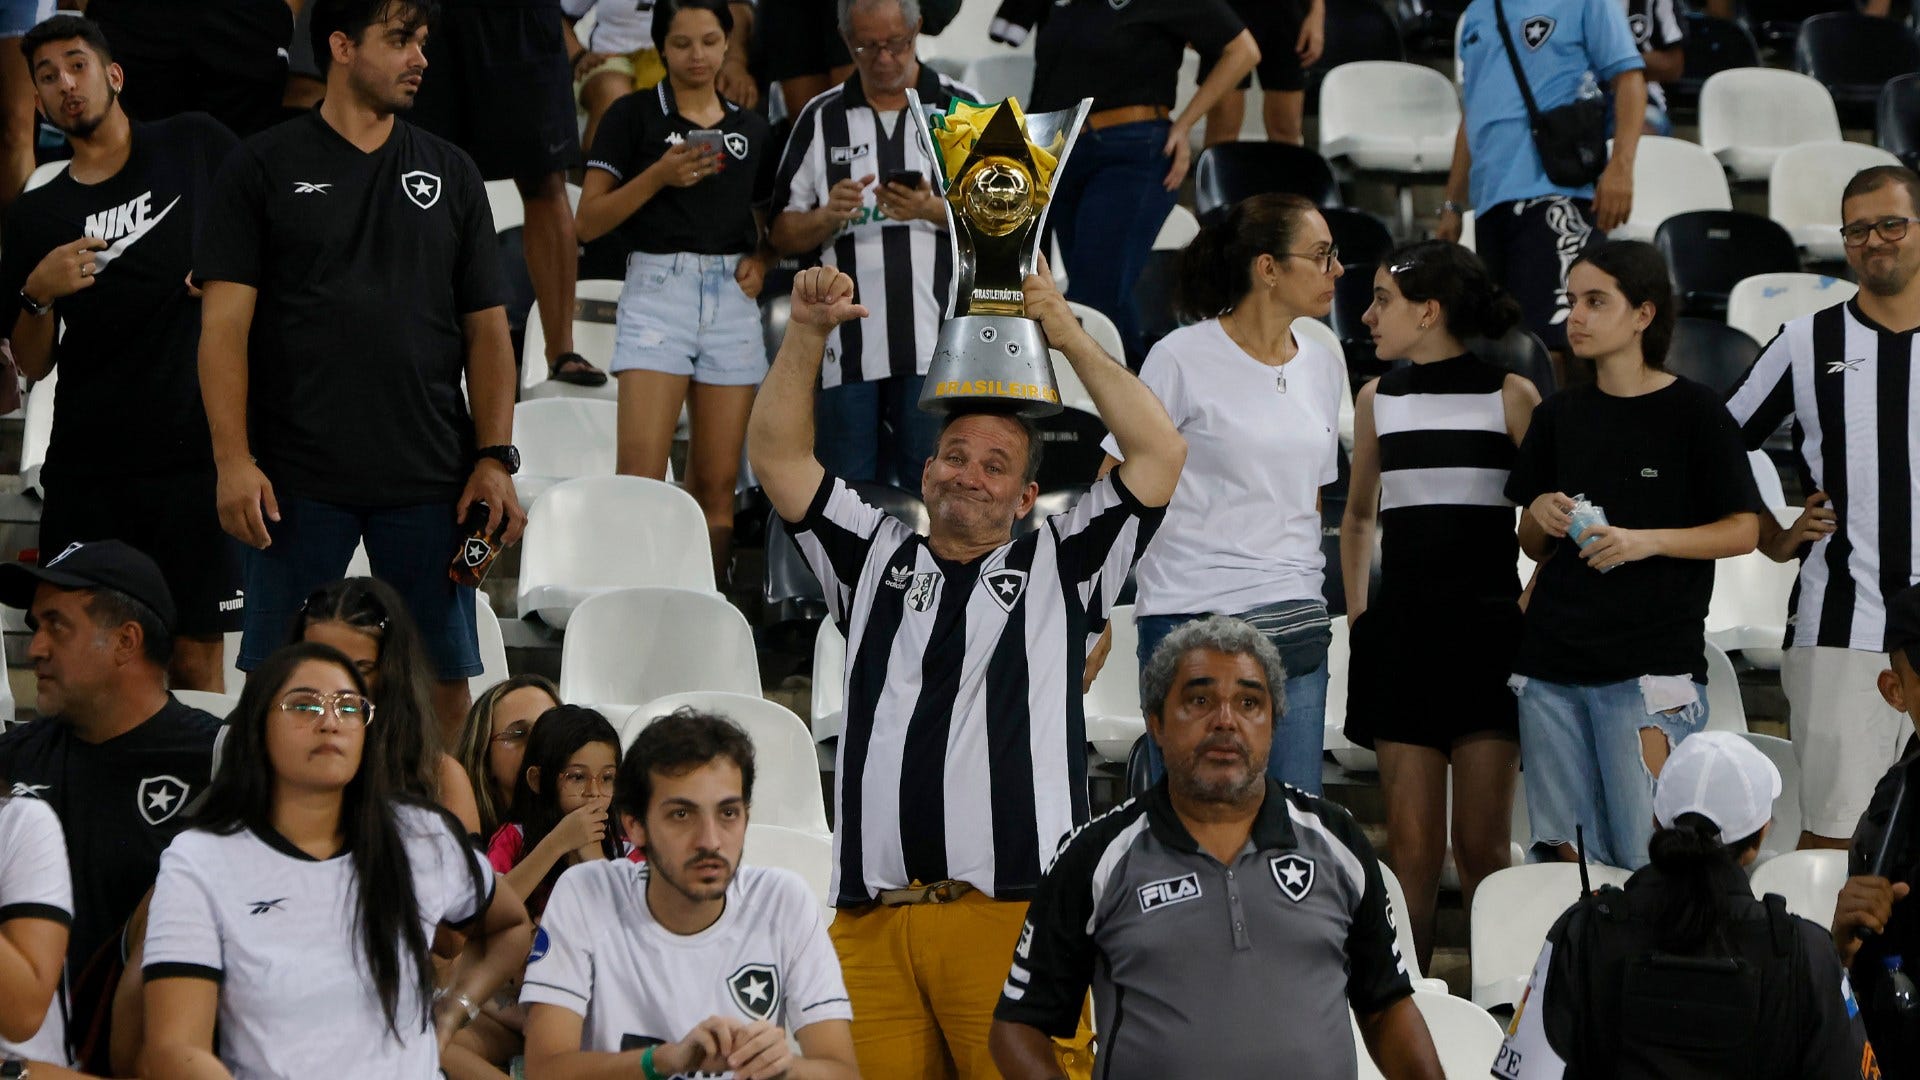 Botafogo bottled a 14 points lead by conceding 4 goals in 4 games